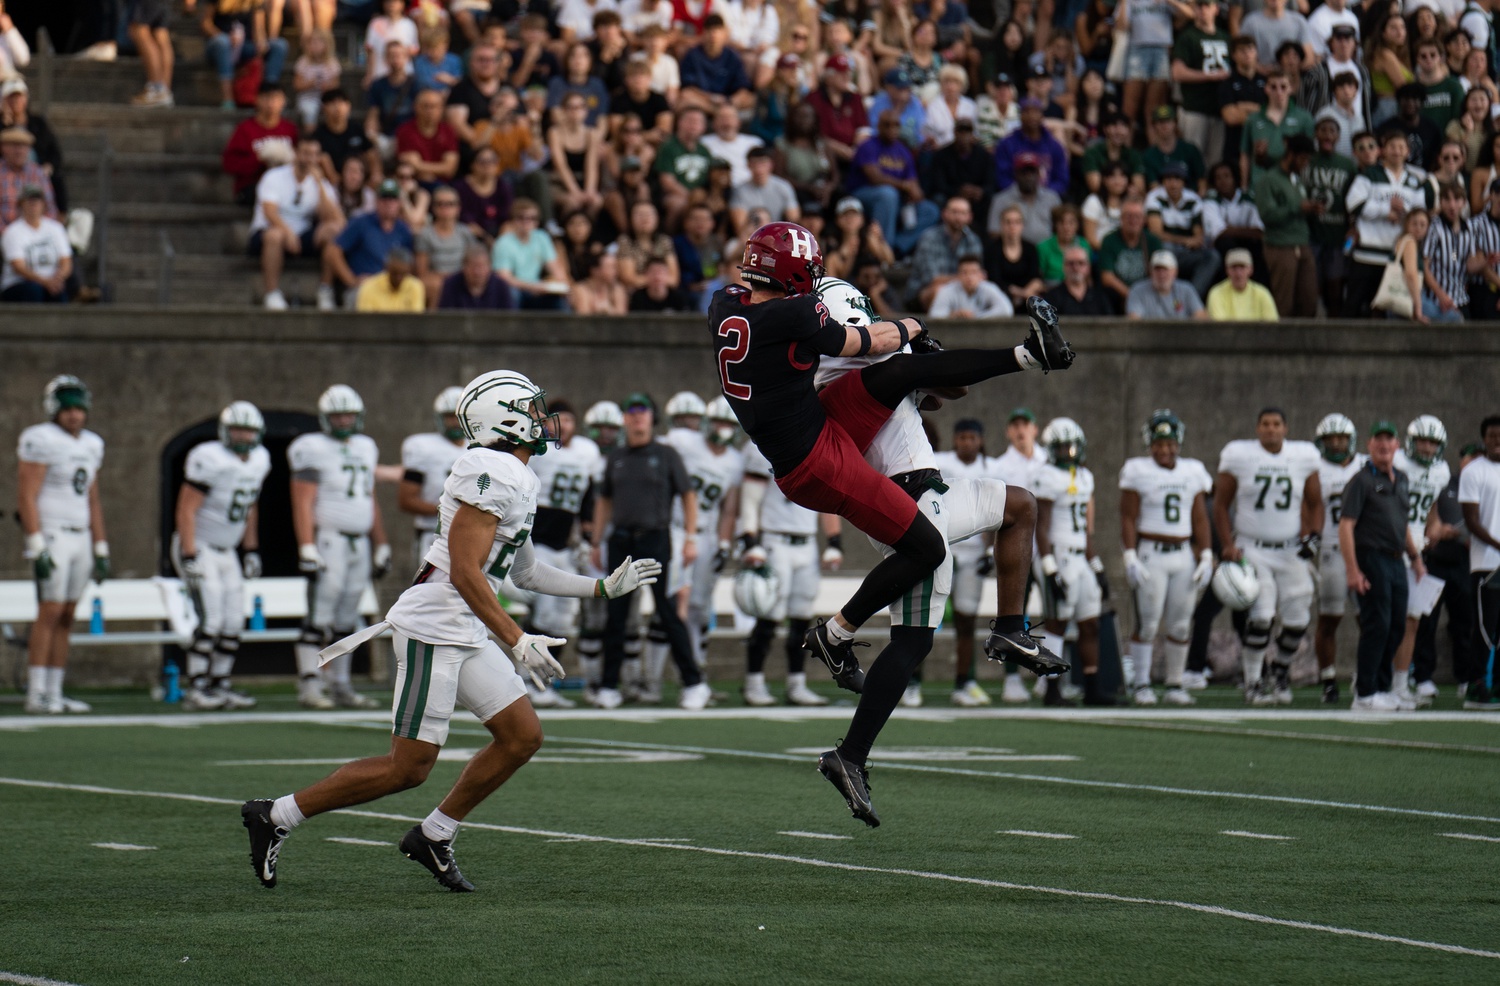 Sophomore wide receiver Cooper Barkate lunges upward for a pass in the Crimson's Oct. 28 game against Darmouth. Harvard pulled out a 17-9 win over the Big Green.